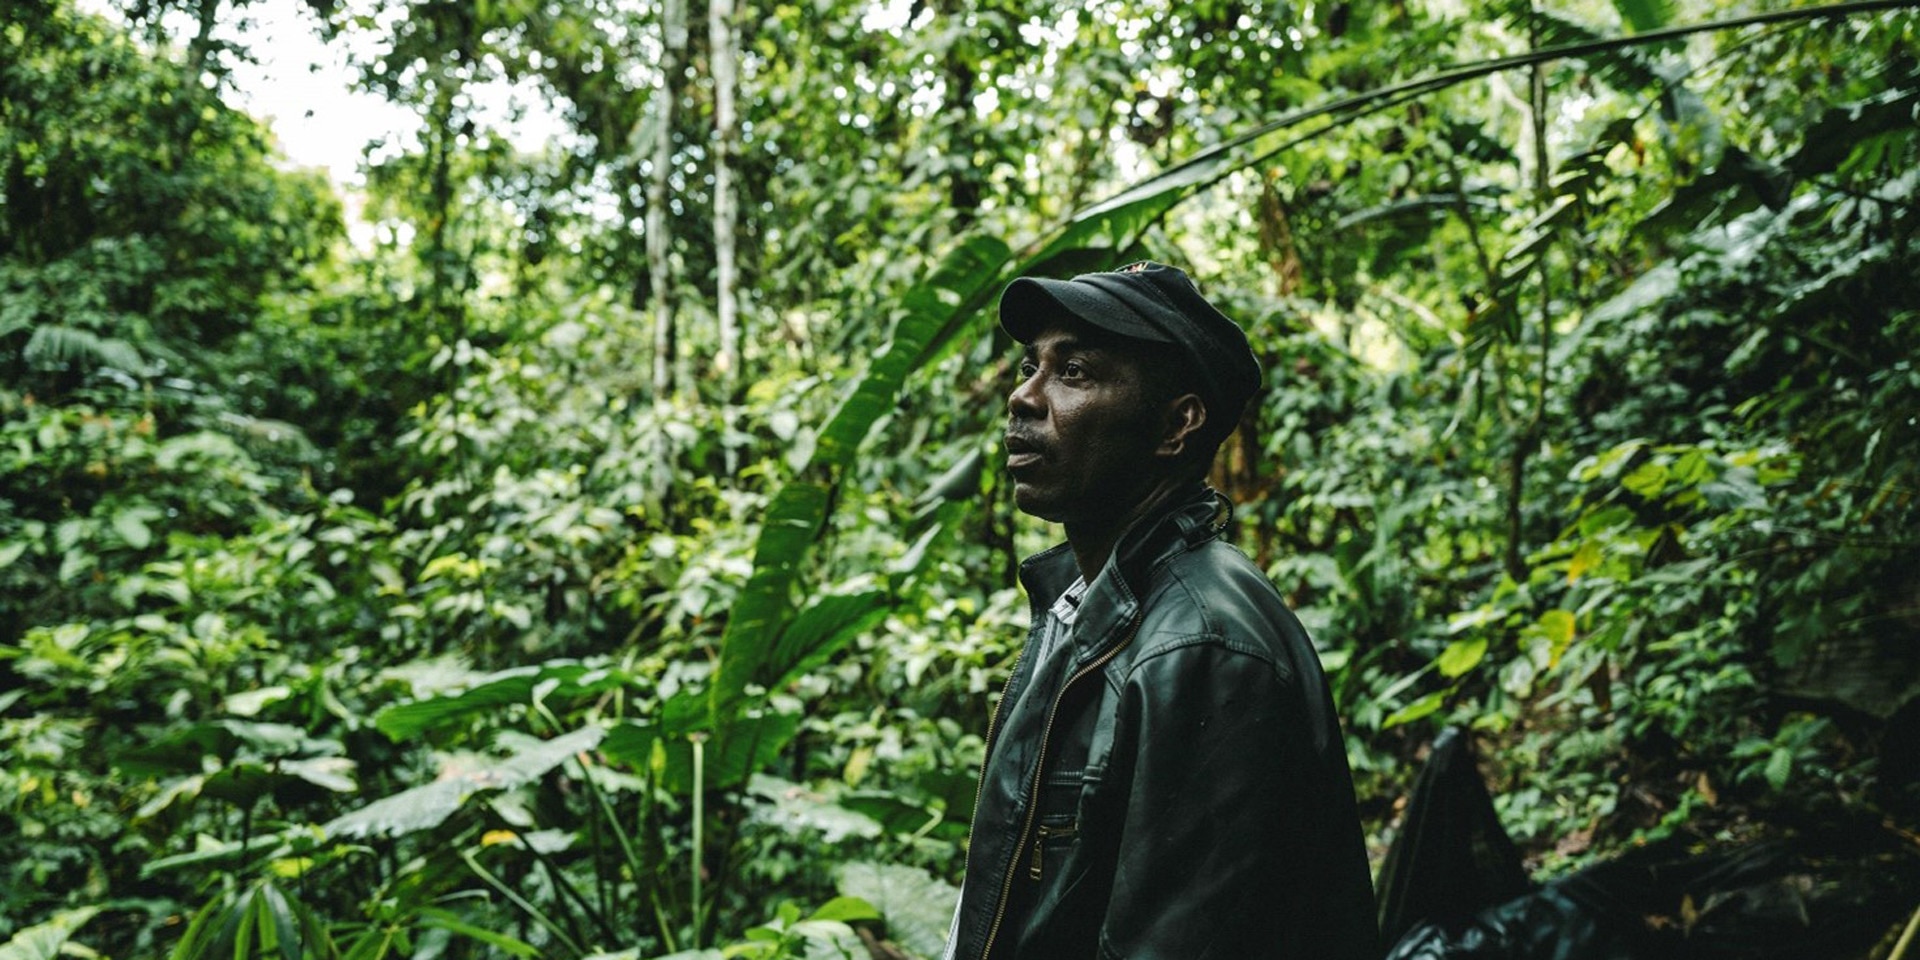 A man wearing a leather jacket standing in a green and lush jungle.